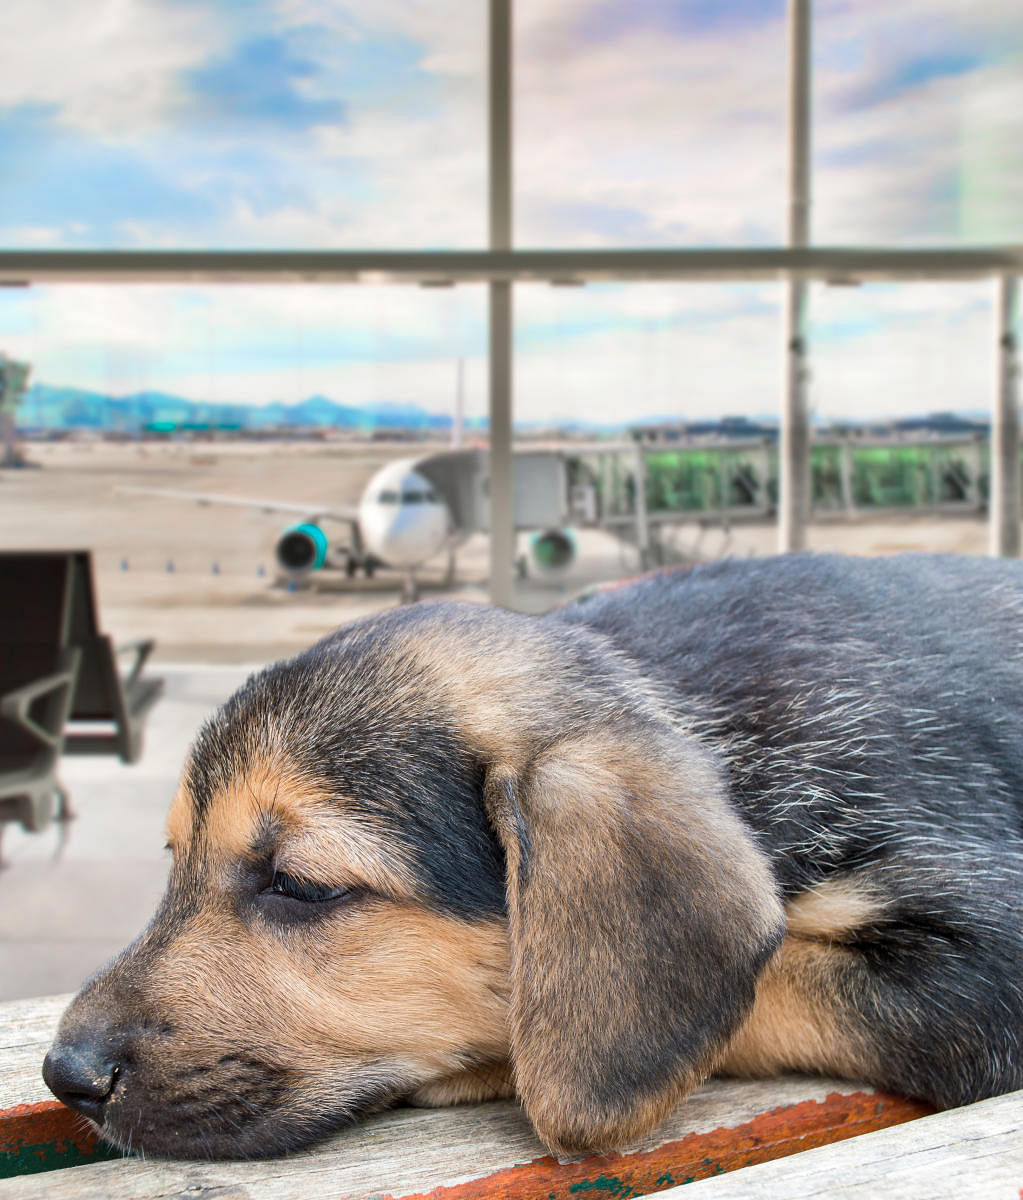 Paws at airport departure gates